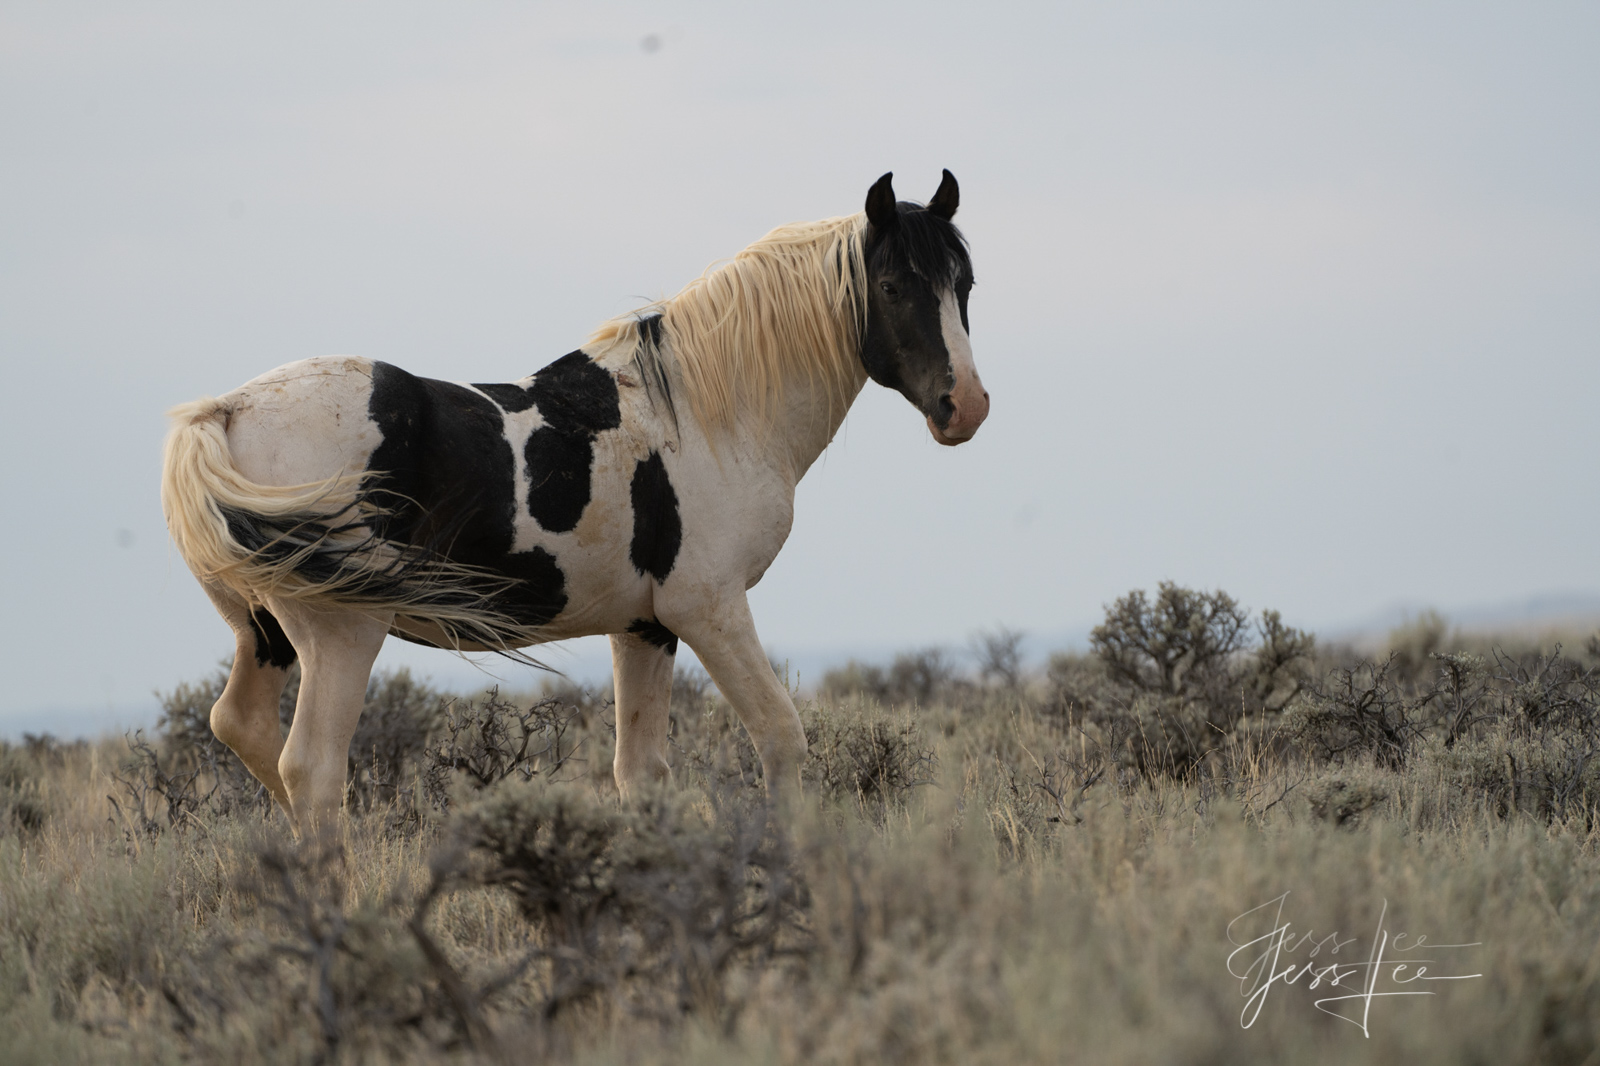 Fine Art Print of Wyoming Wild Paint Horse. Limited Edition of 250 Luxurious Prints.  Choose the style, size, and medium for...